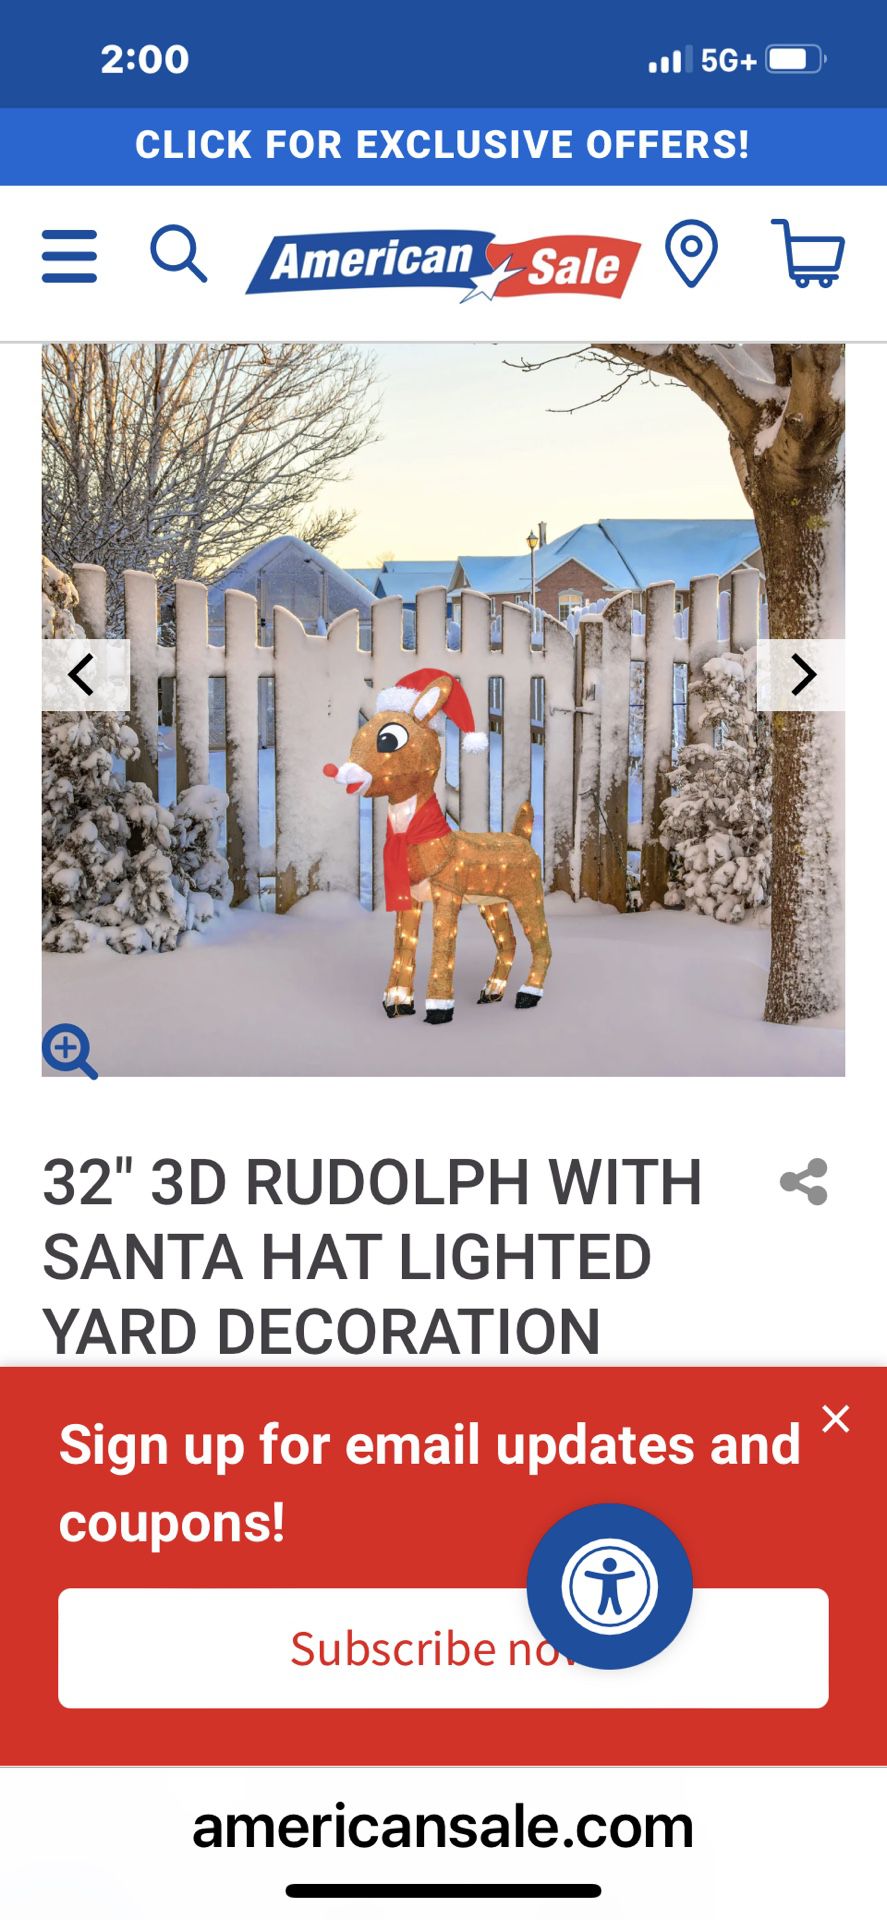 32" 3D RUDOLPH WITH SANTA HAT LIGHTED YARD DECORATION $99